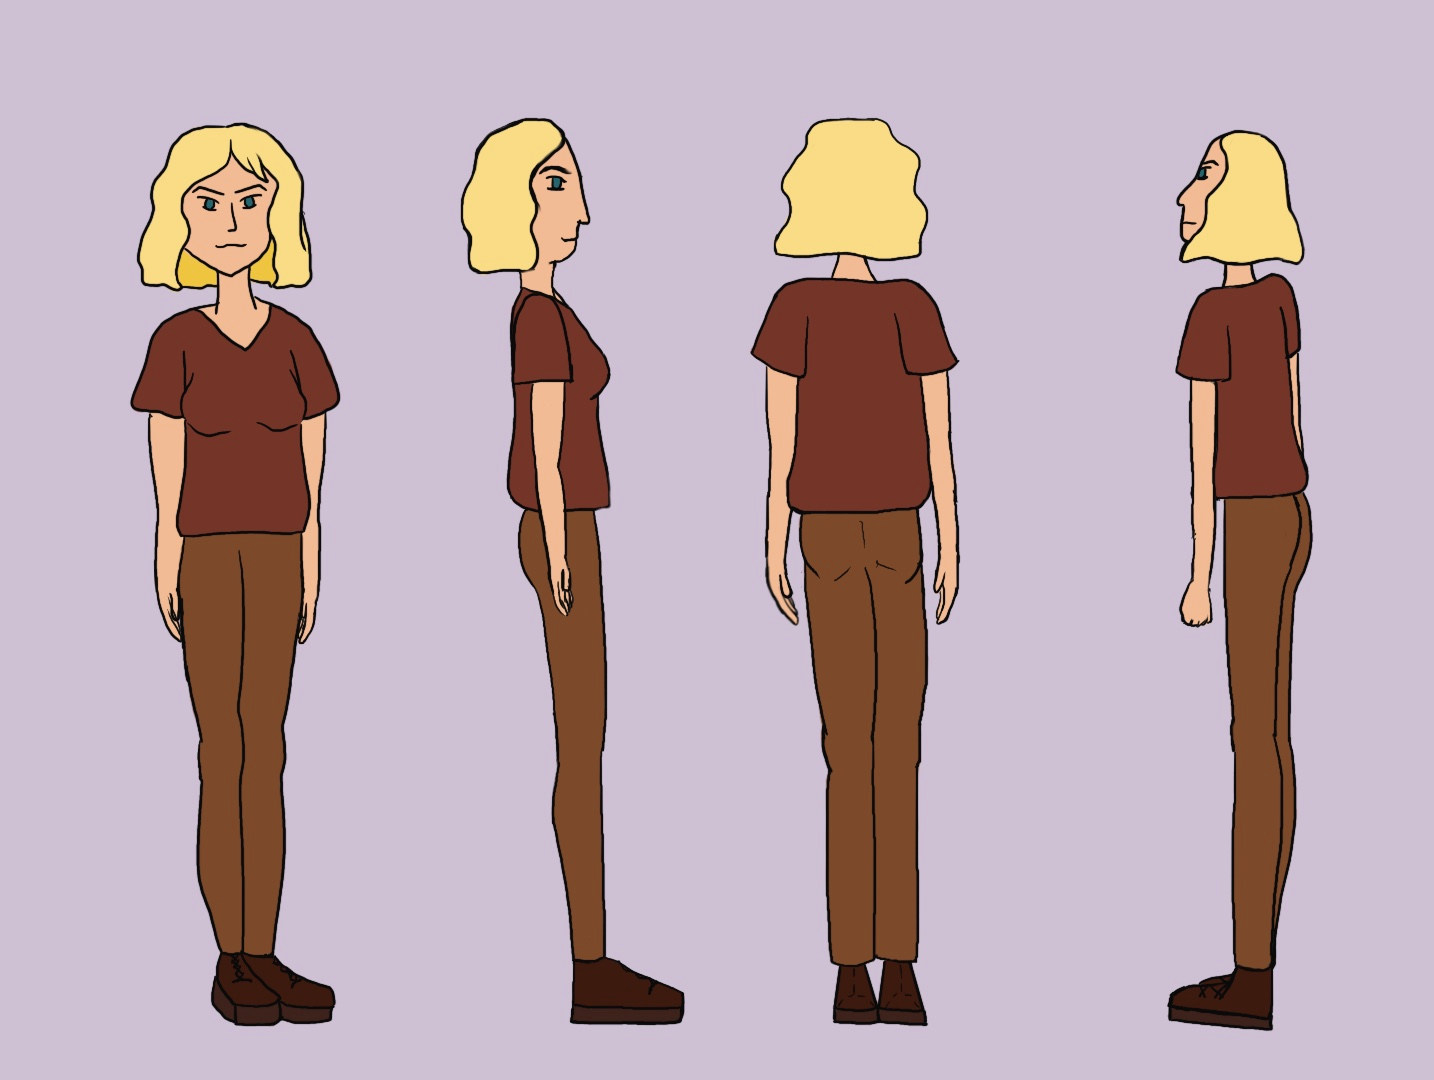 Illustration of woman seen from four different angles